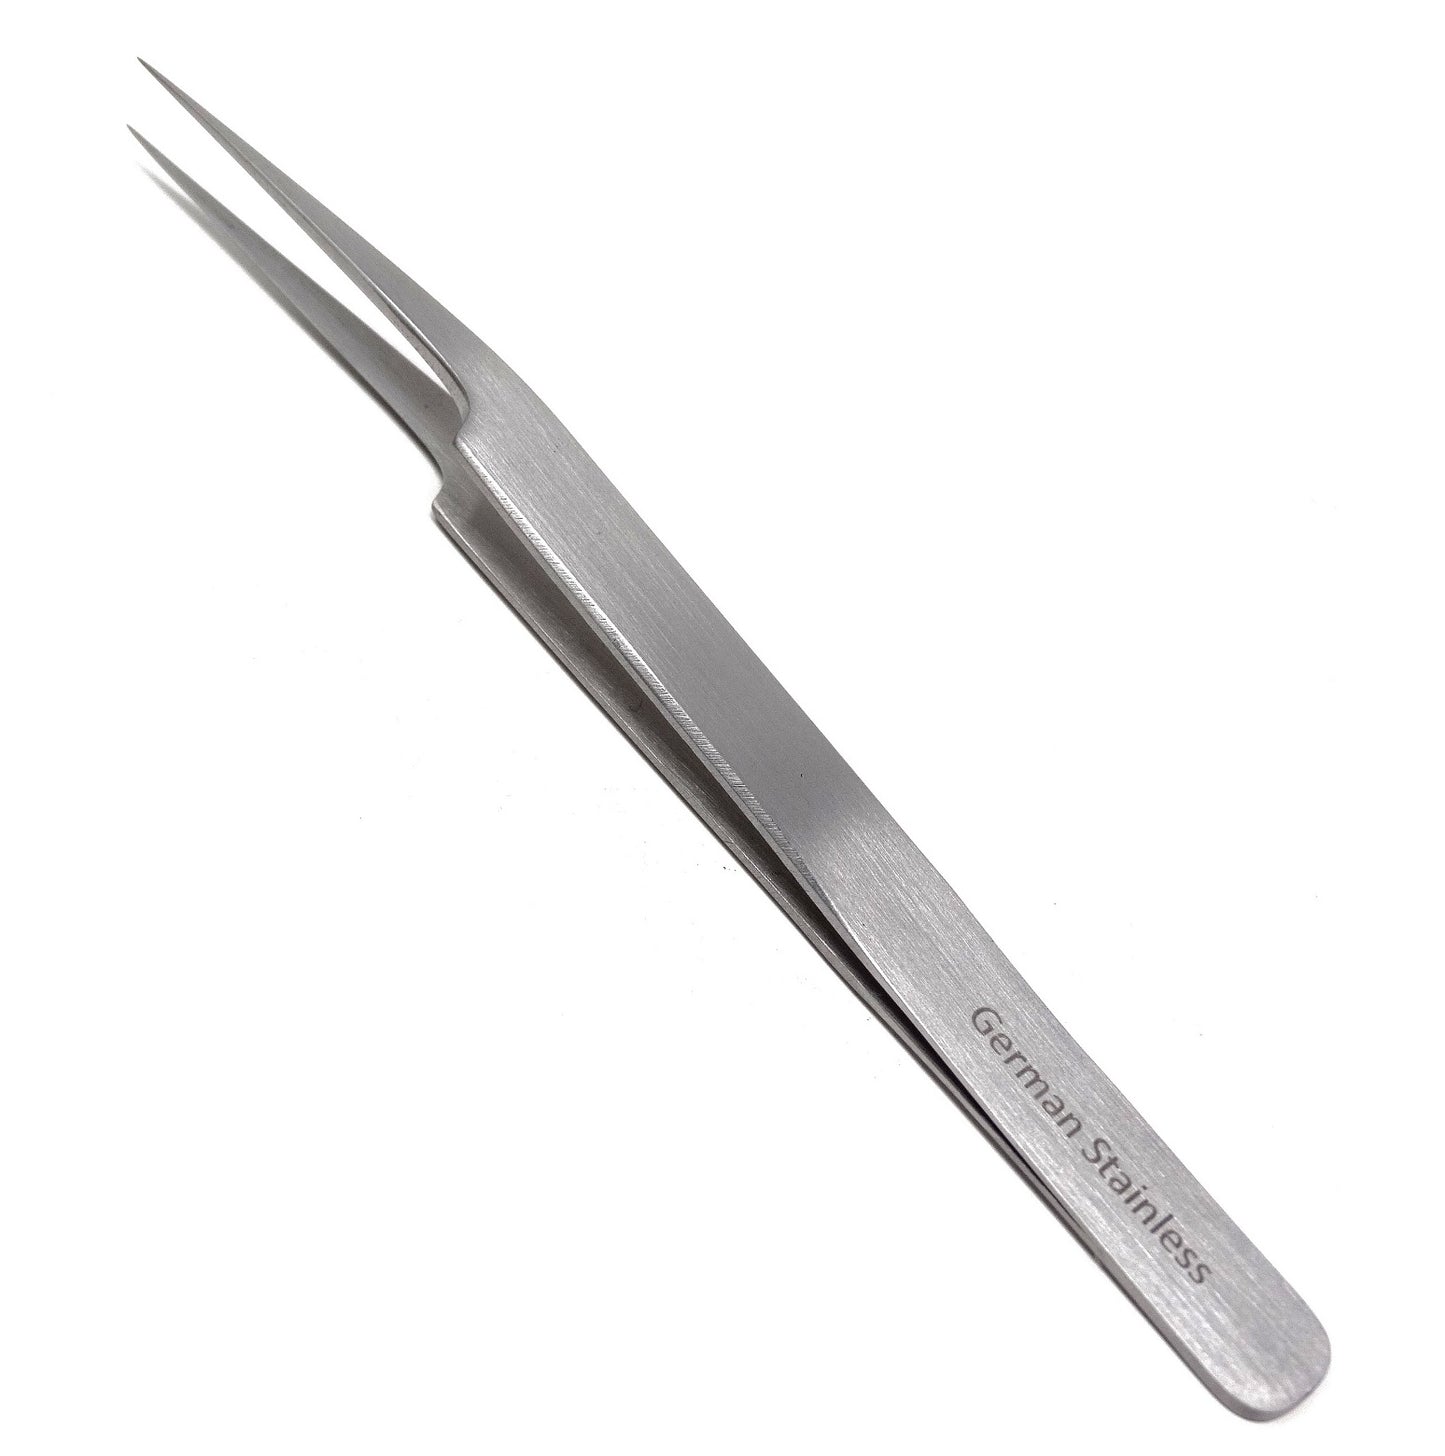 Stainless Steel Micro Surgical Forceps Tweezers Pro Straight, Premium Quality